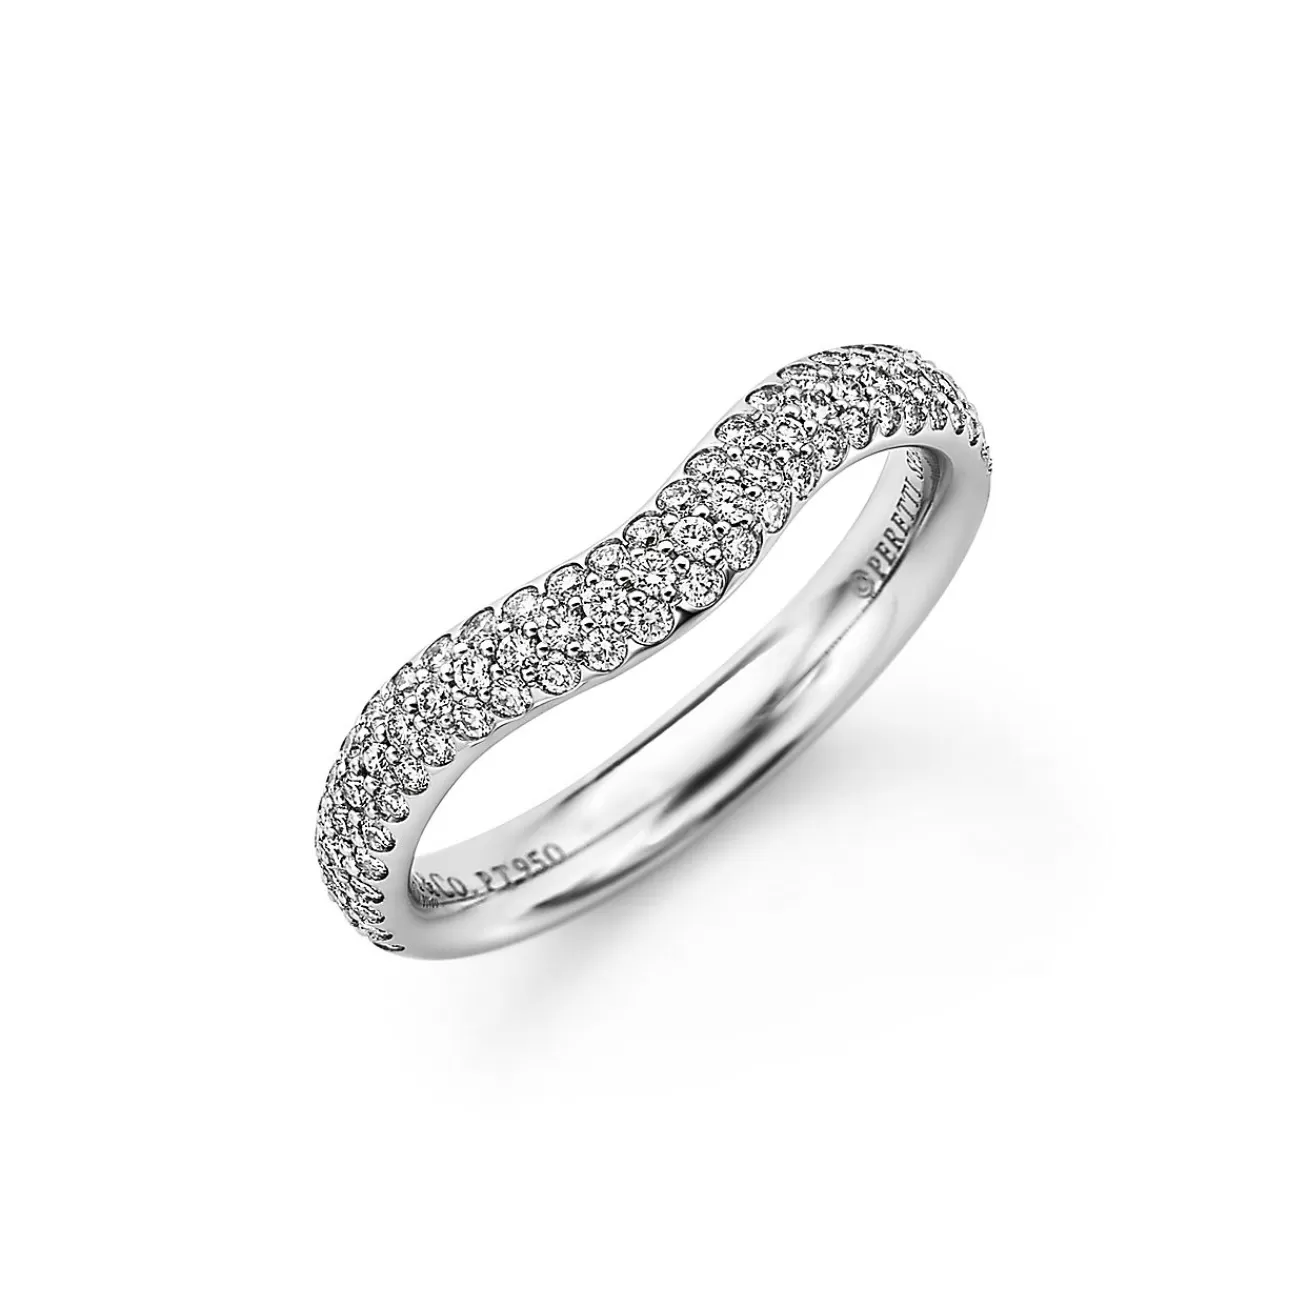 Tiffany & Co. Elsa Peretti® curved band ring in platinum with diamonds. | ^ Rings | Stacking Rings